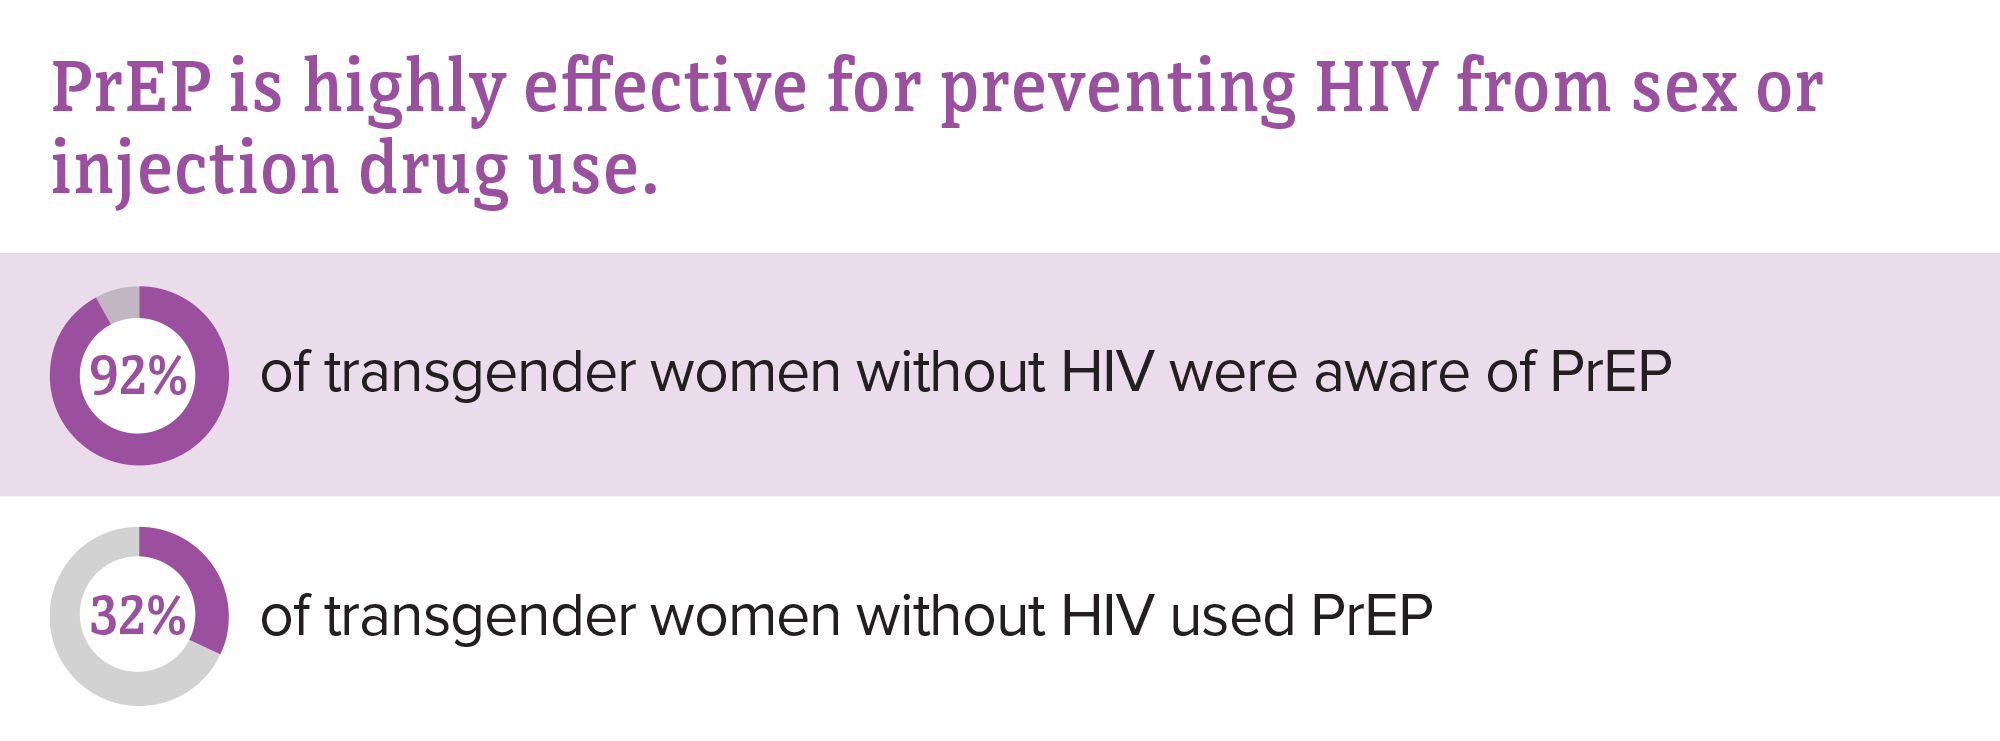 PrEP is highly effective for preventing HIV from sex or injection drug use.